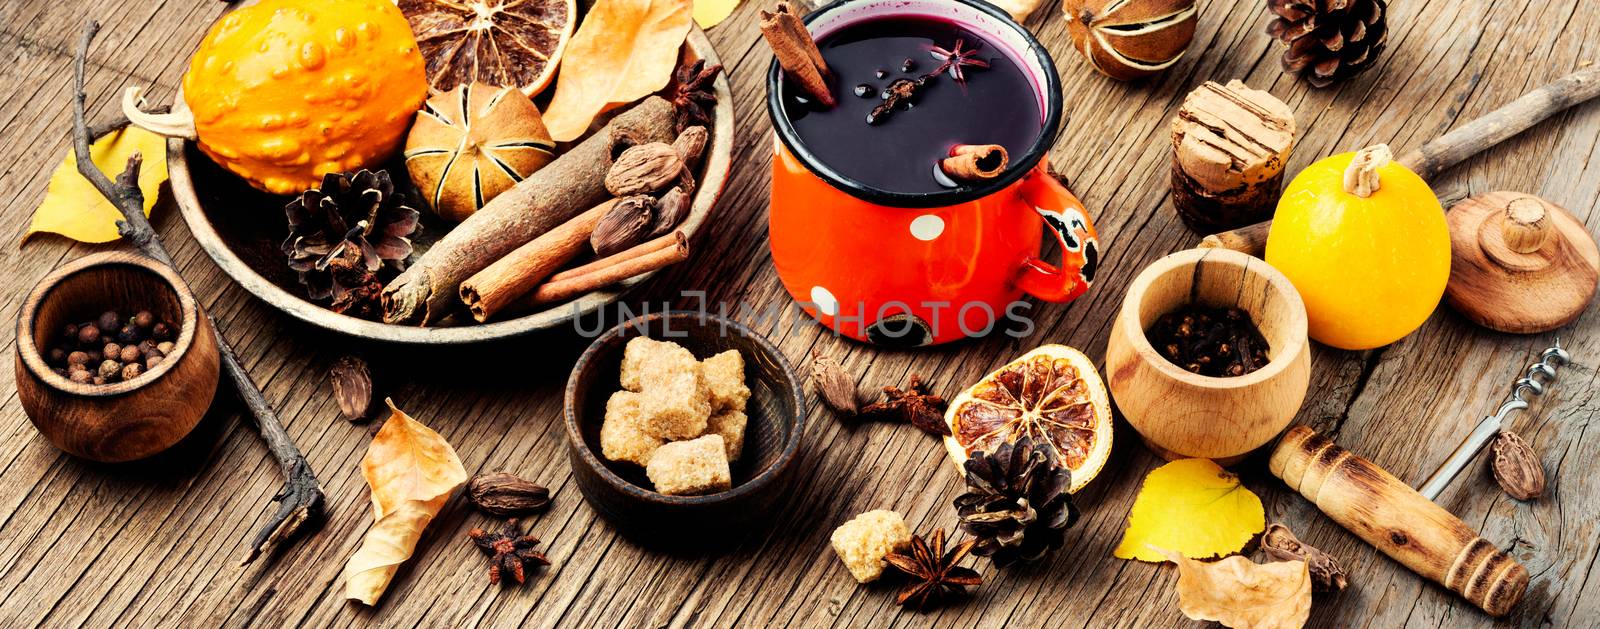 Mulled wine in autumn foliage by LMykola